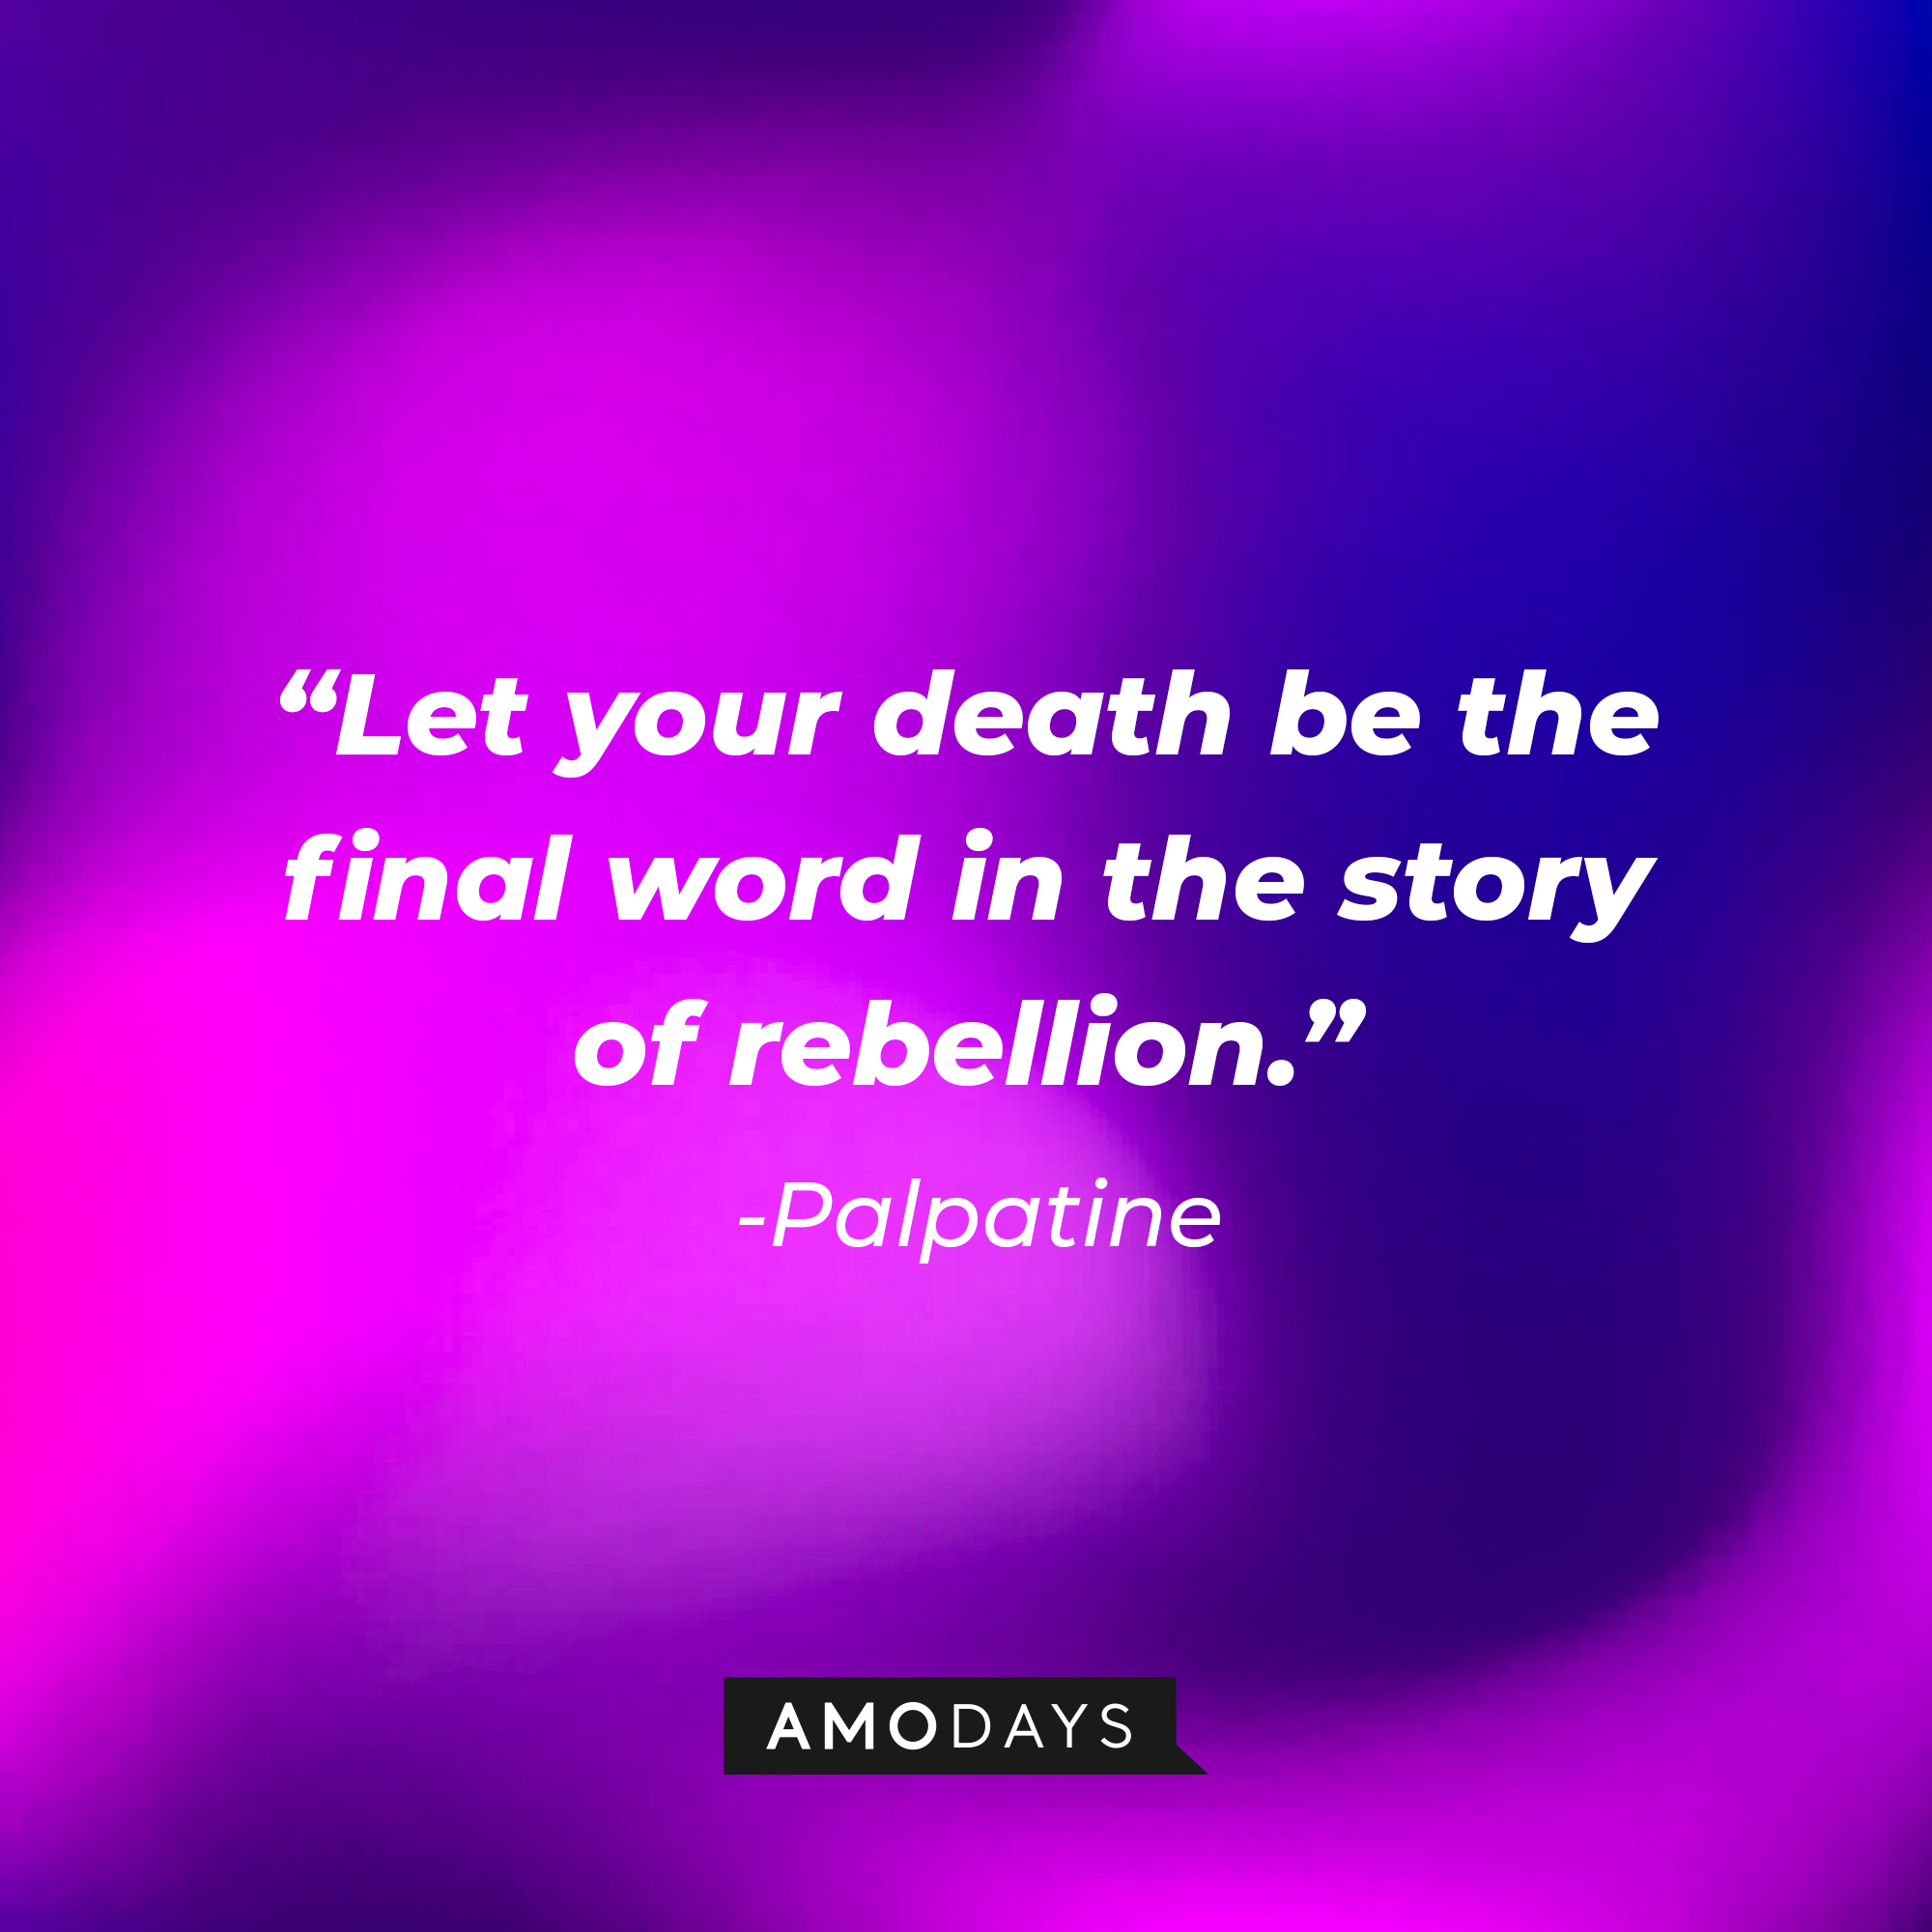 Palpatine’s quote:“Let your death be the final word in the story of rebellion.” | Source: AmoDays